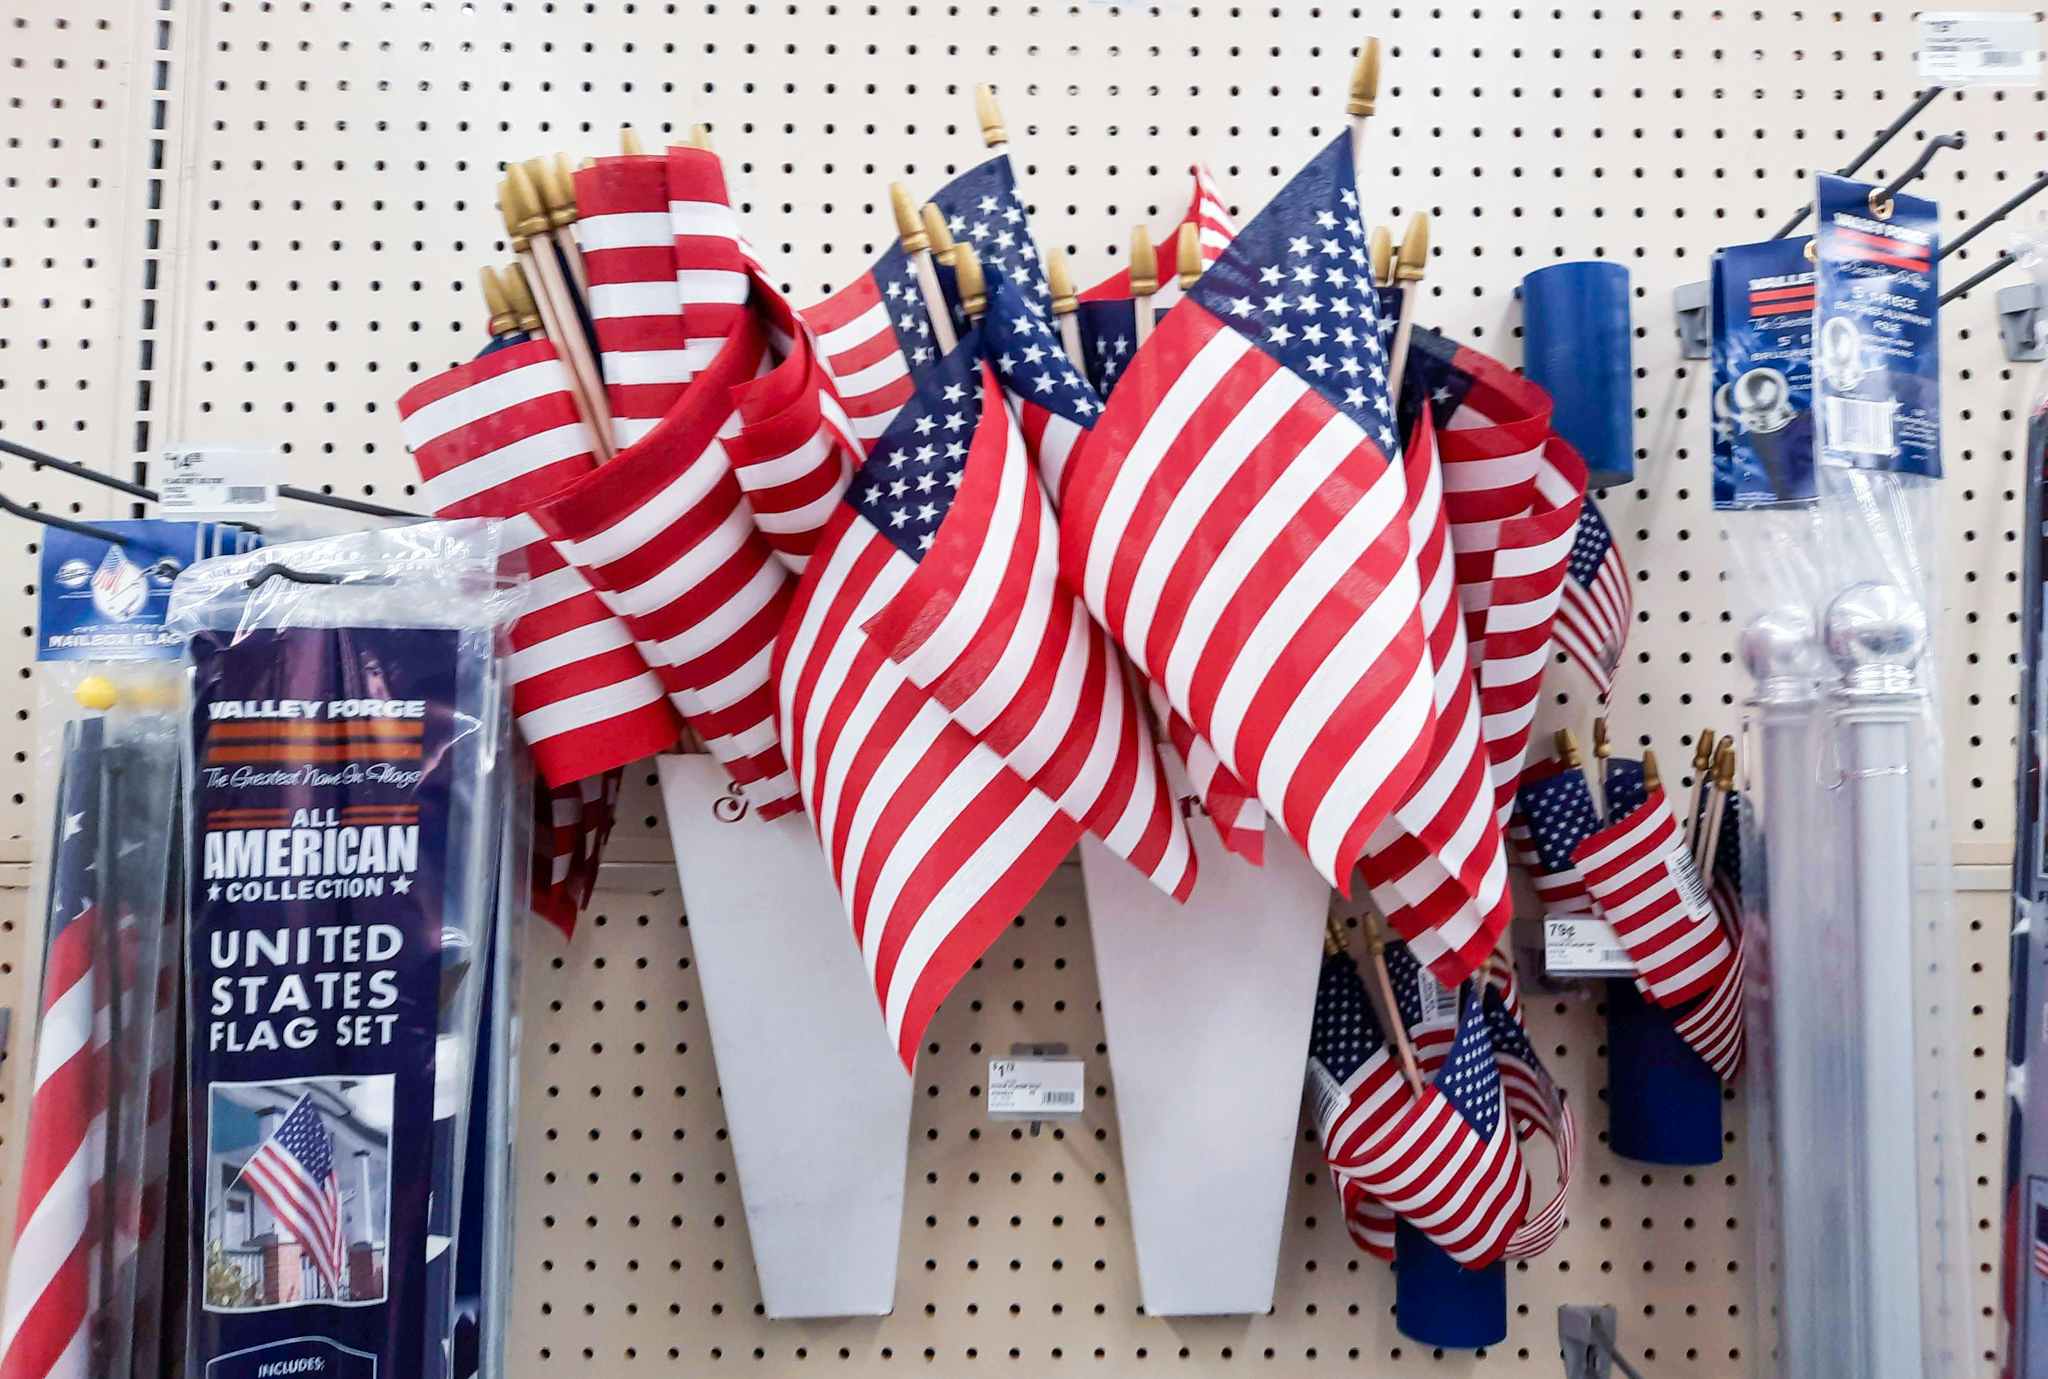 Valley Forge American Stick Flags at Ace Hardware